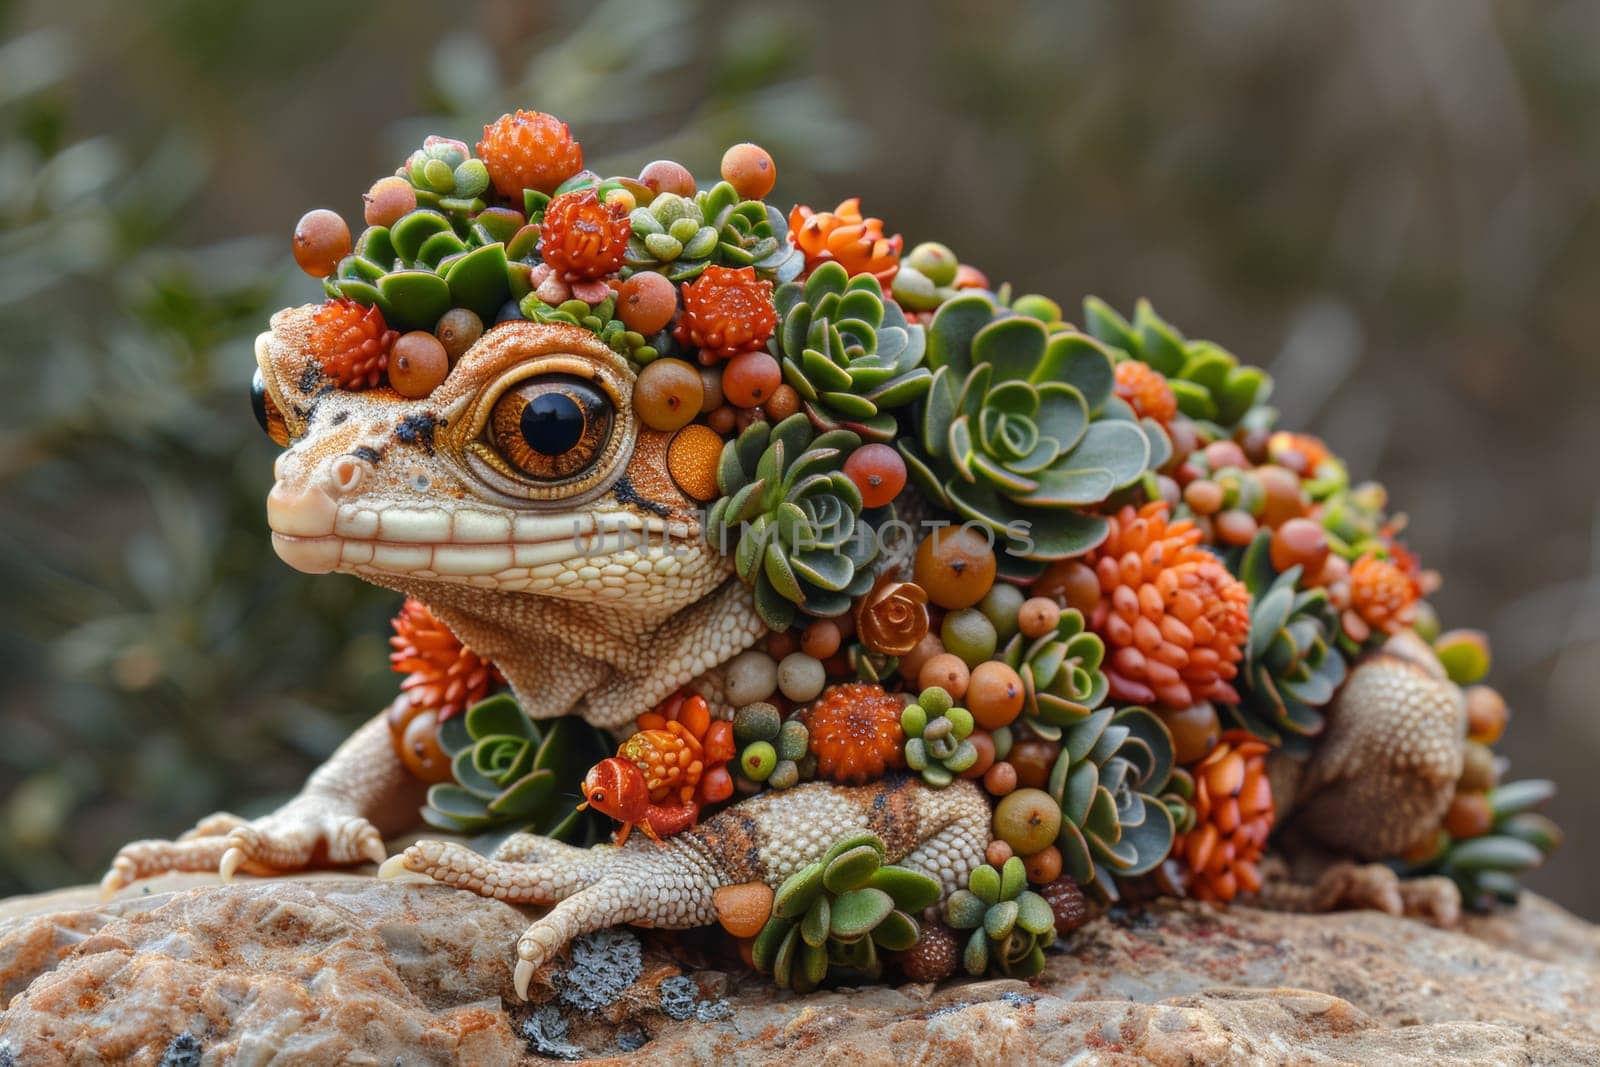 A lizard covered in a bunch of flowers and leaves